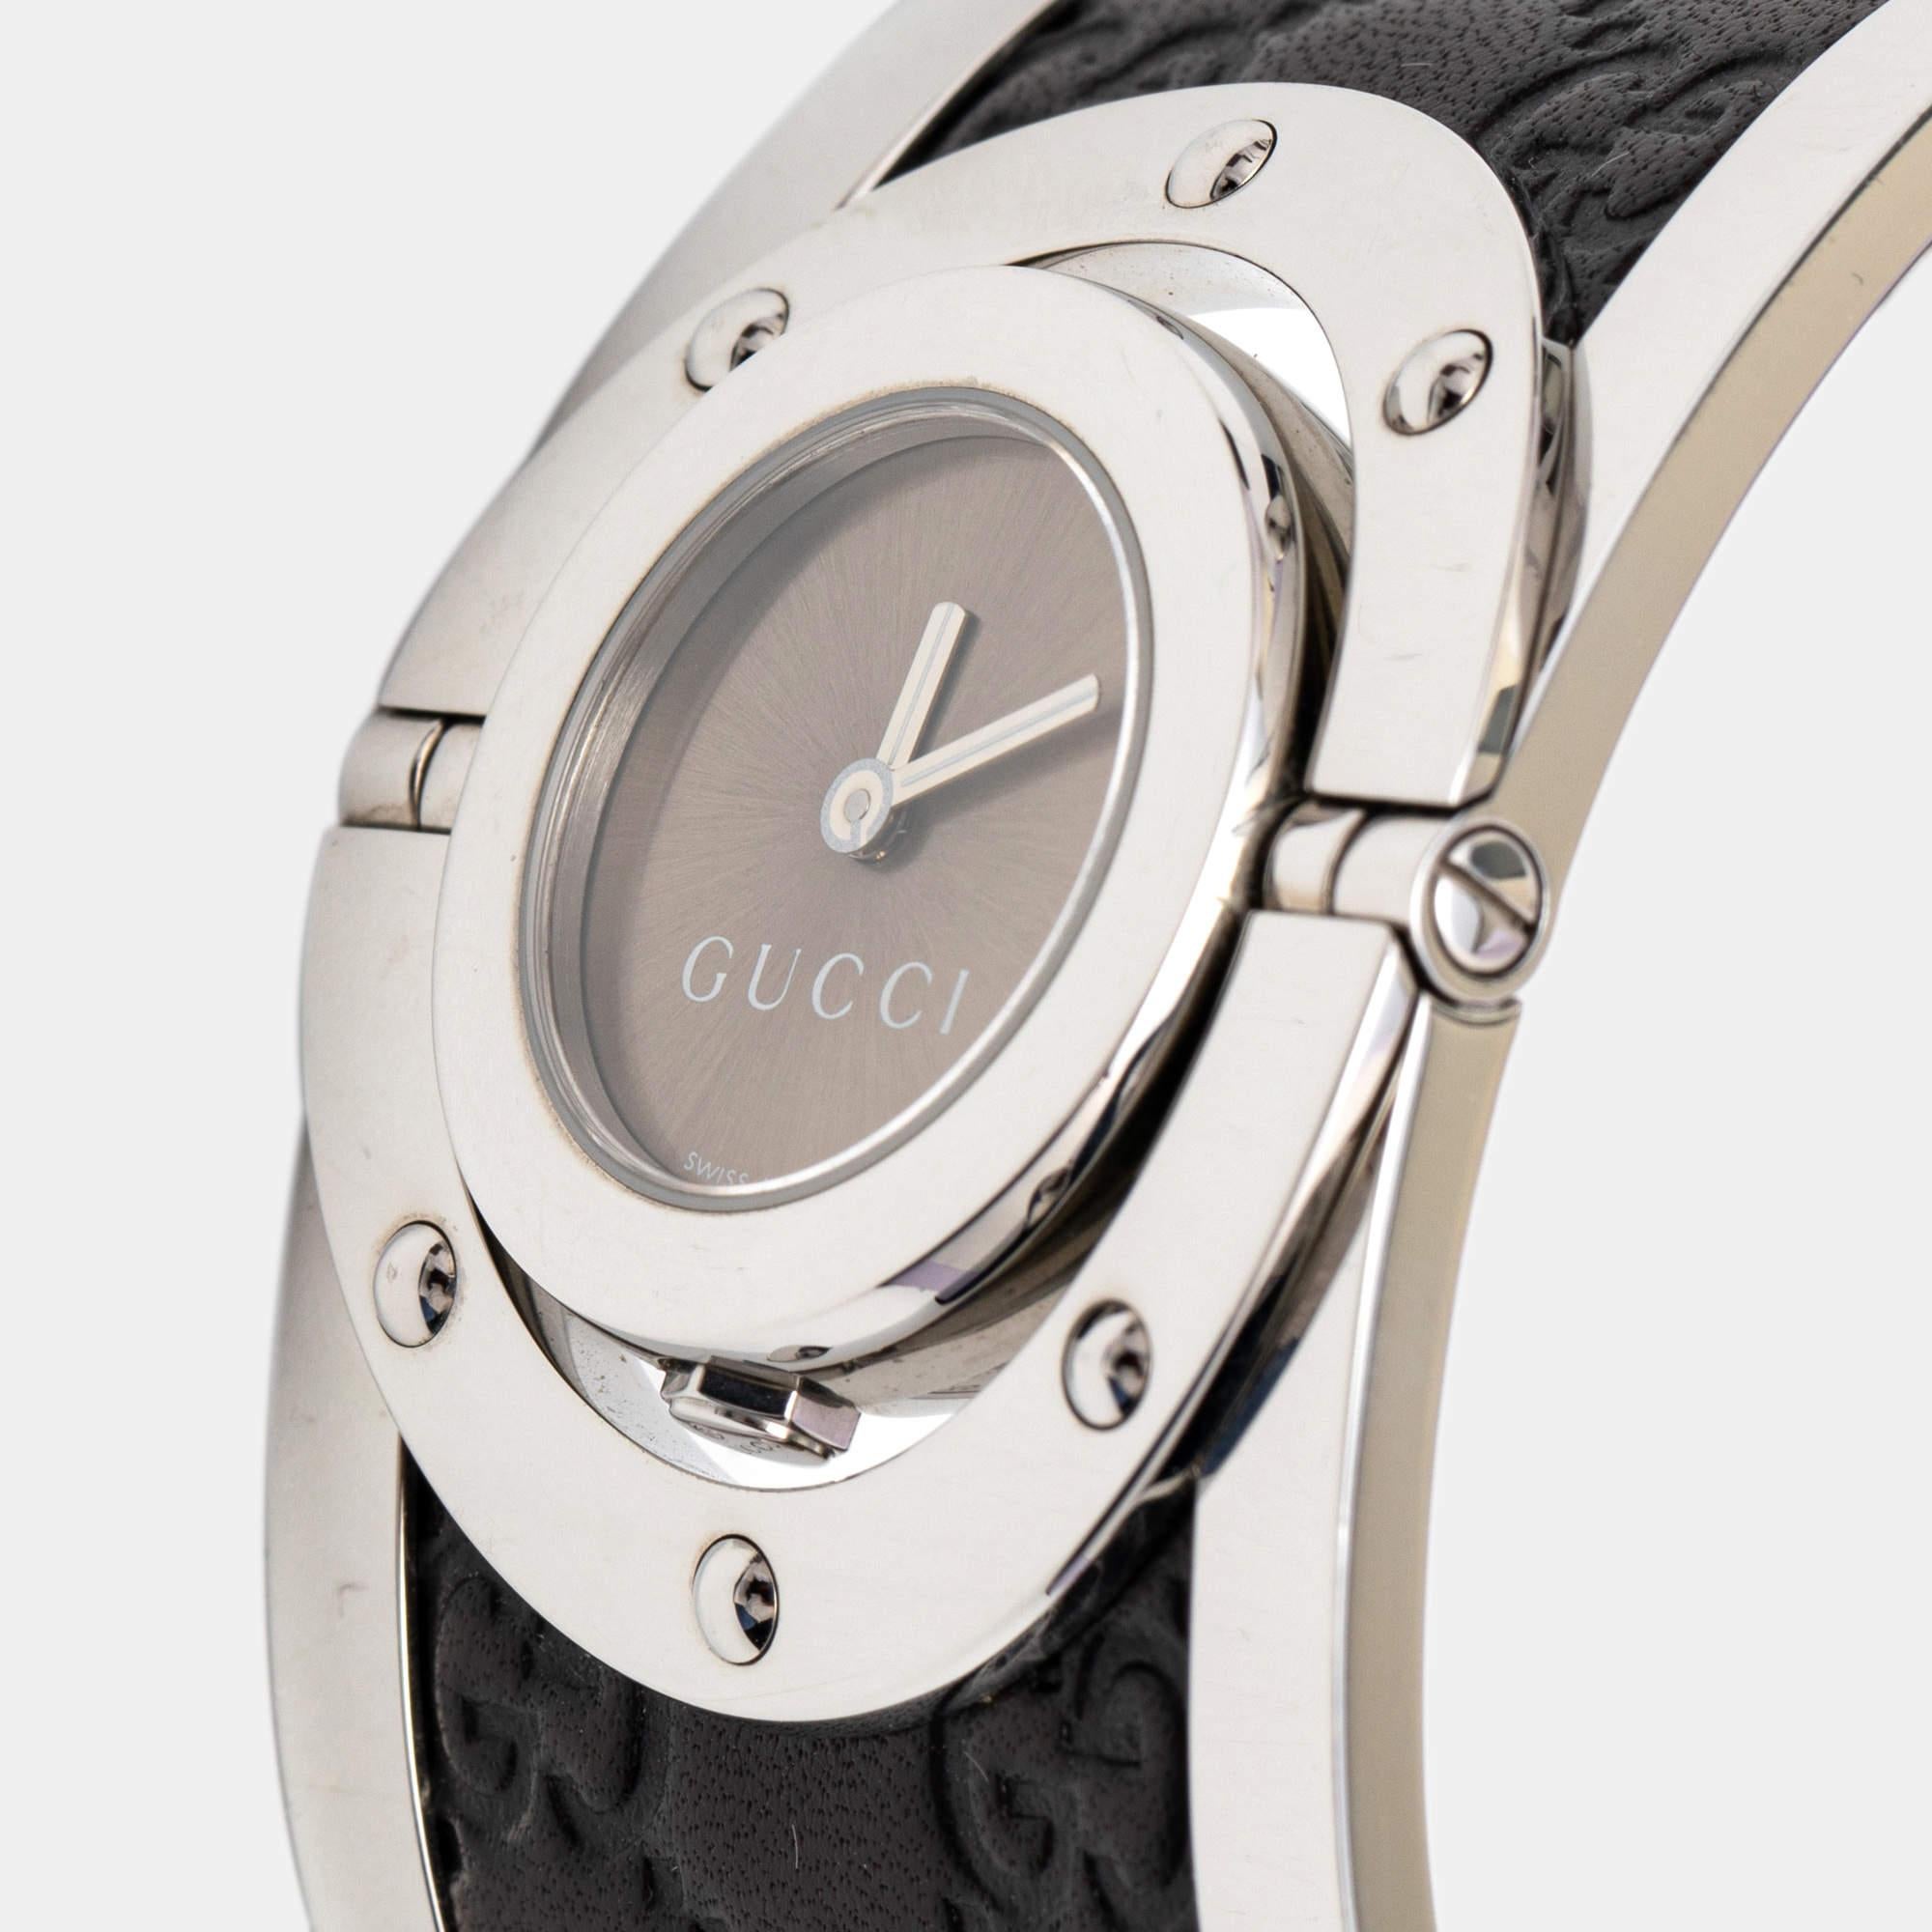 Stunningly crafted, this Gucci Twirl watch is the choice of a modern woman. The timepiece carries artistic craftsmanship of stainless steel & leather along with beautiful detailing like the plain brown dial and two hands. The round case can be